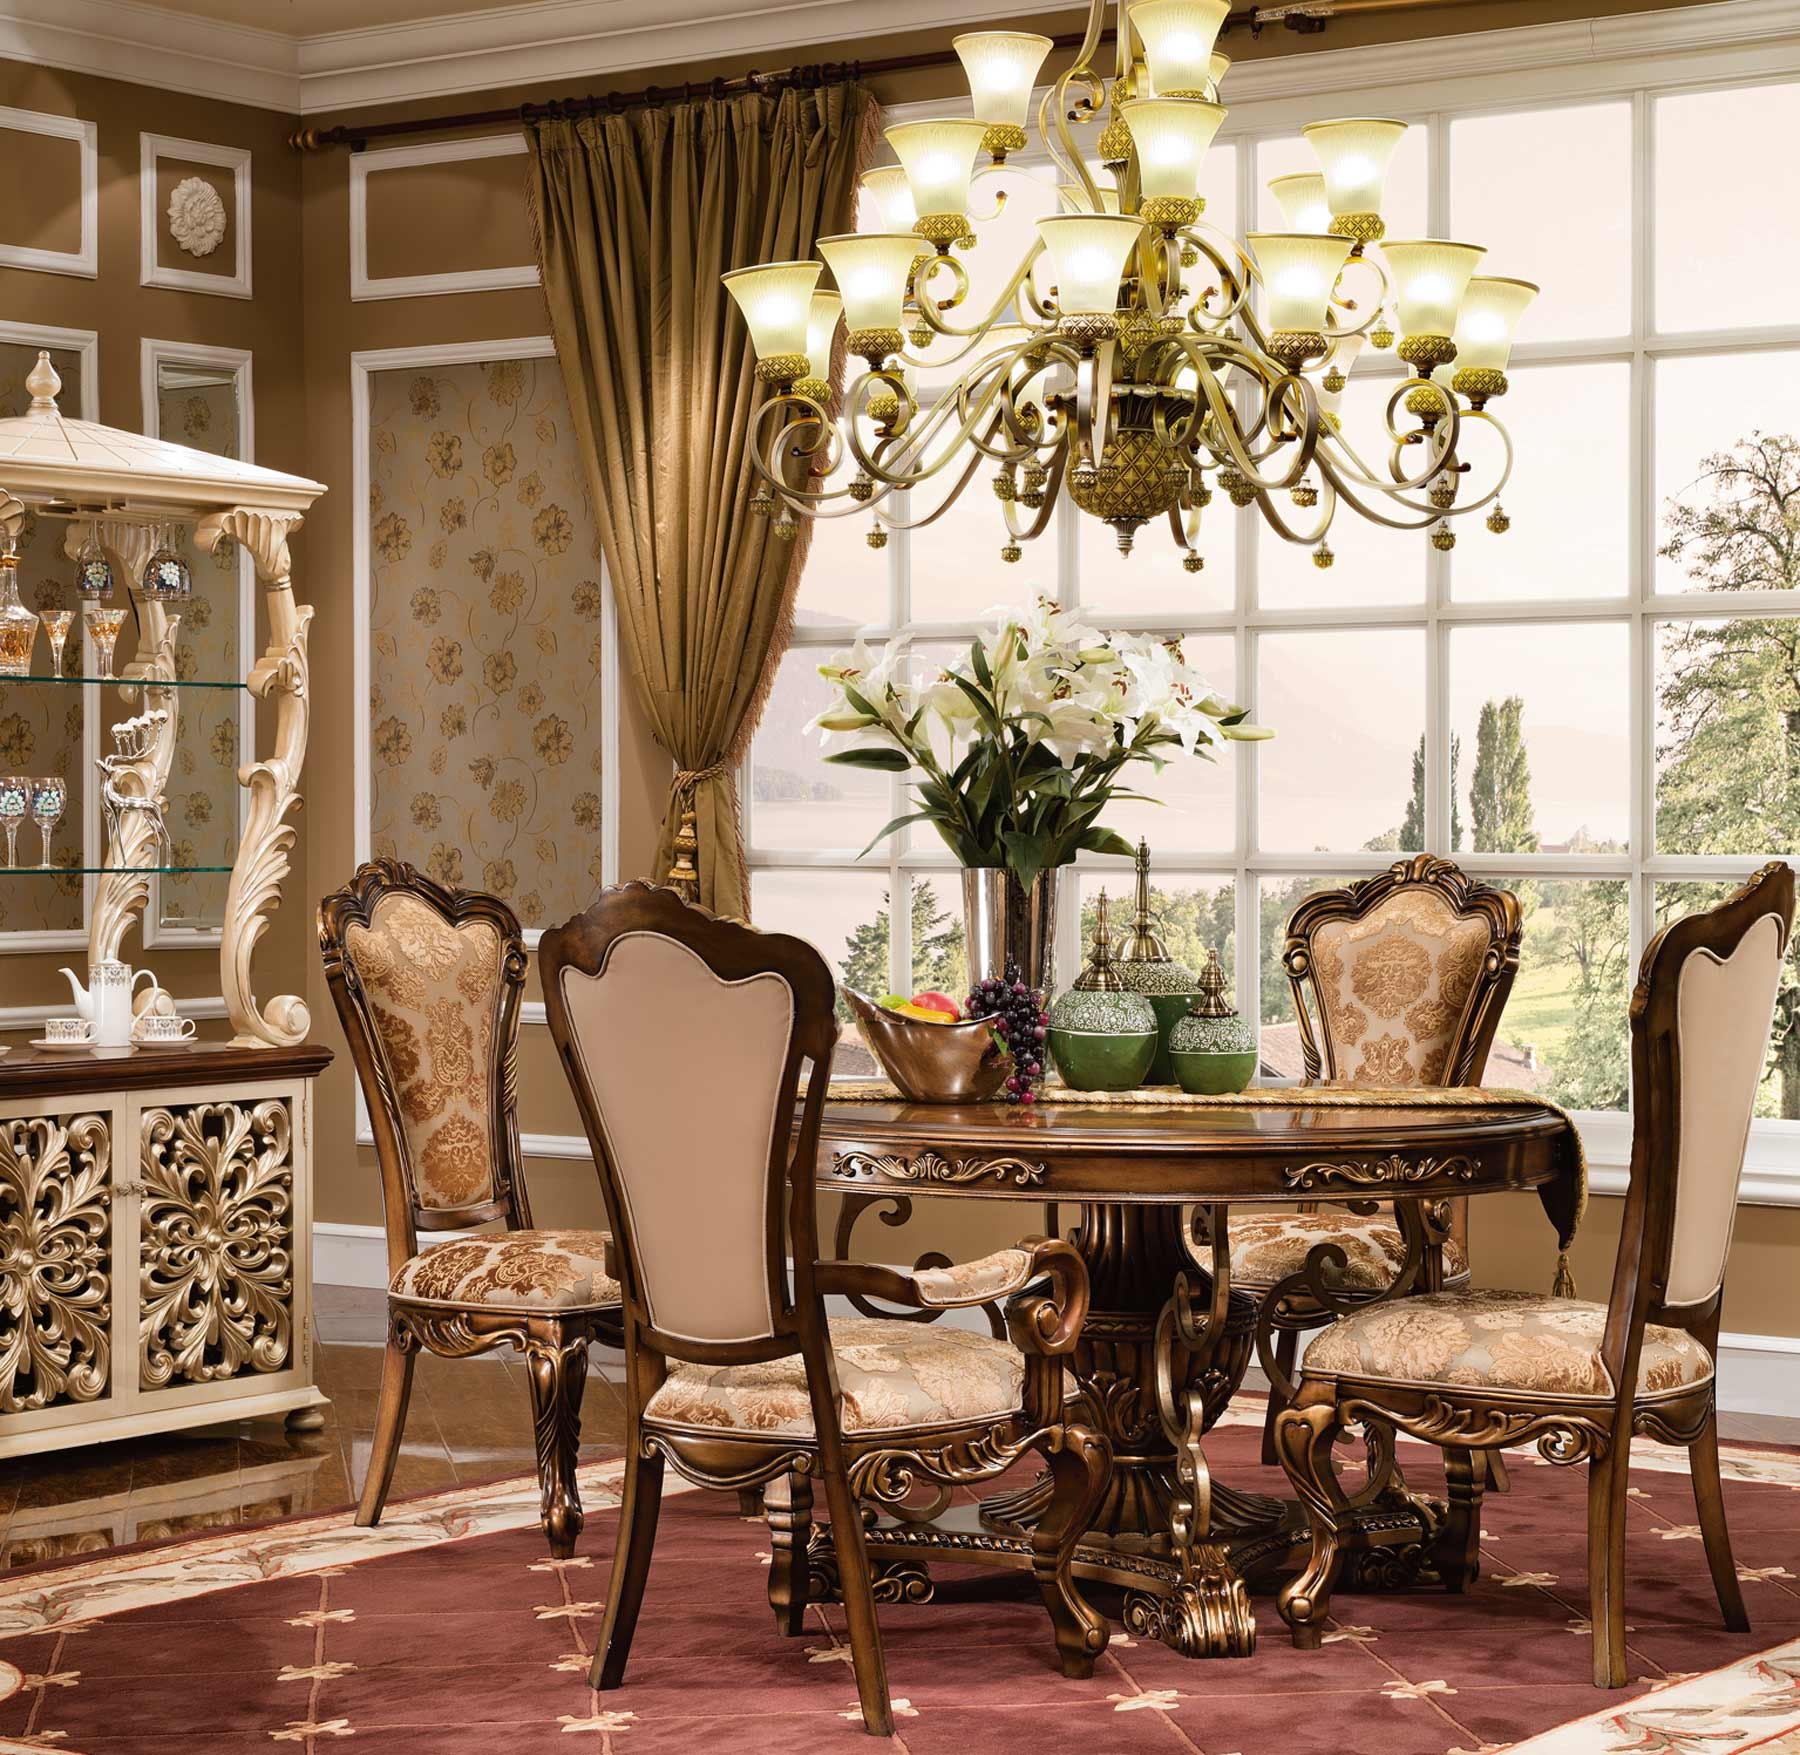 Newhaven 5-pc Dining Set shown in Parisian Bronze